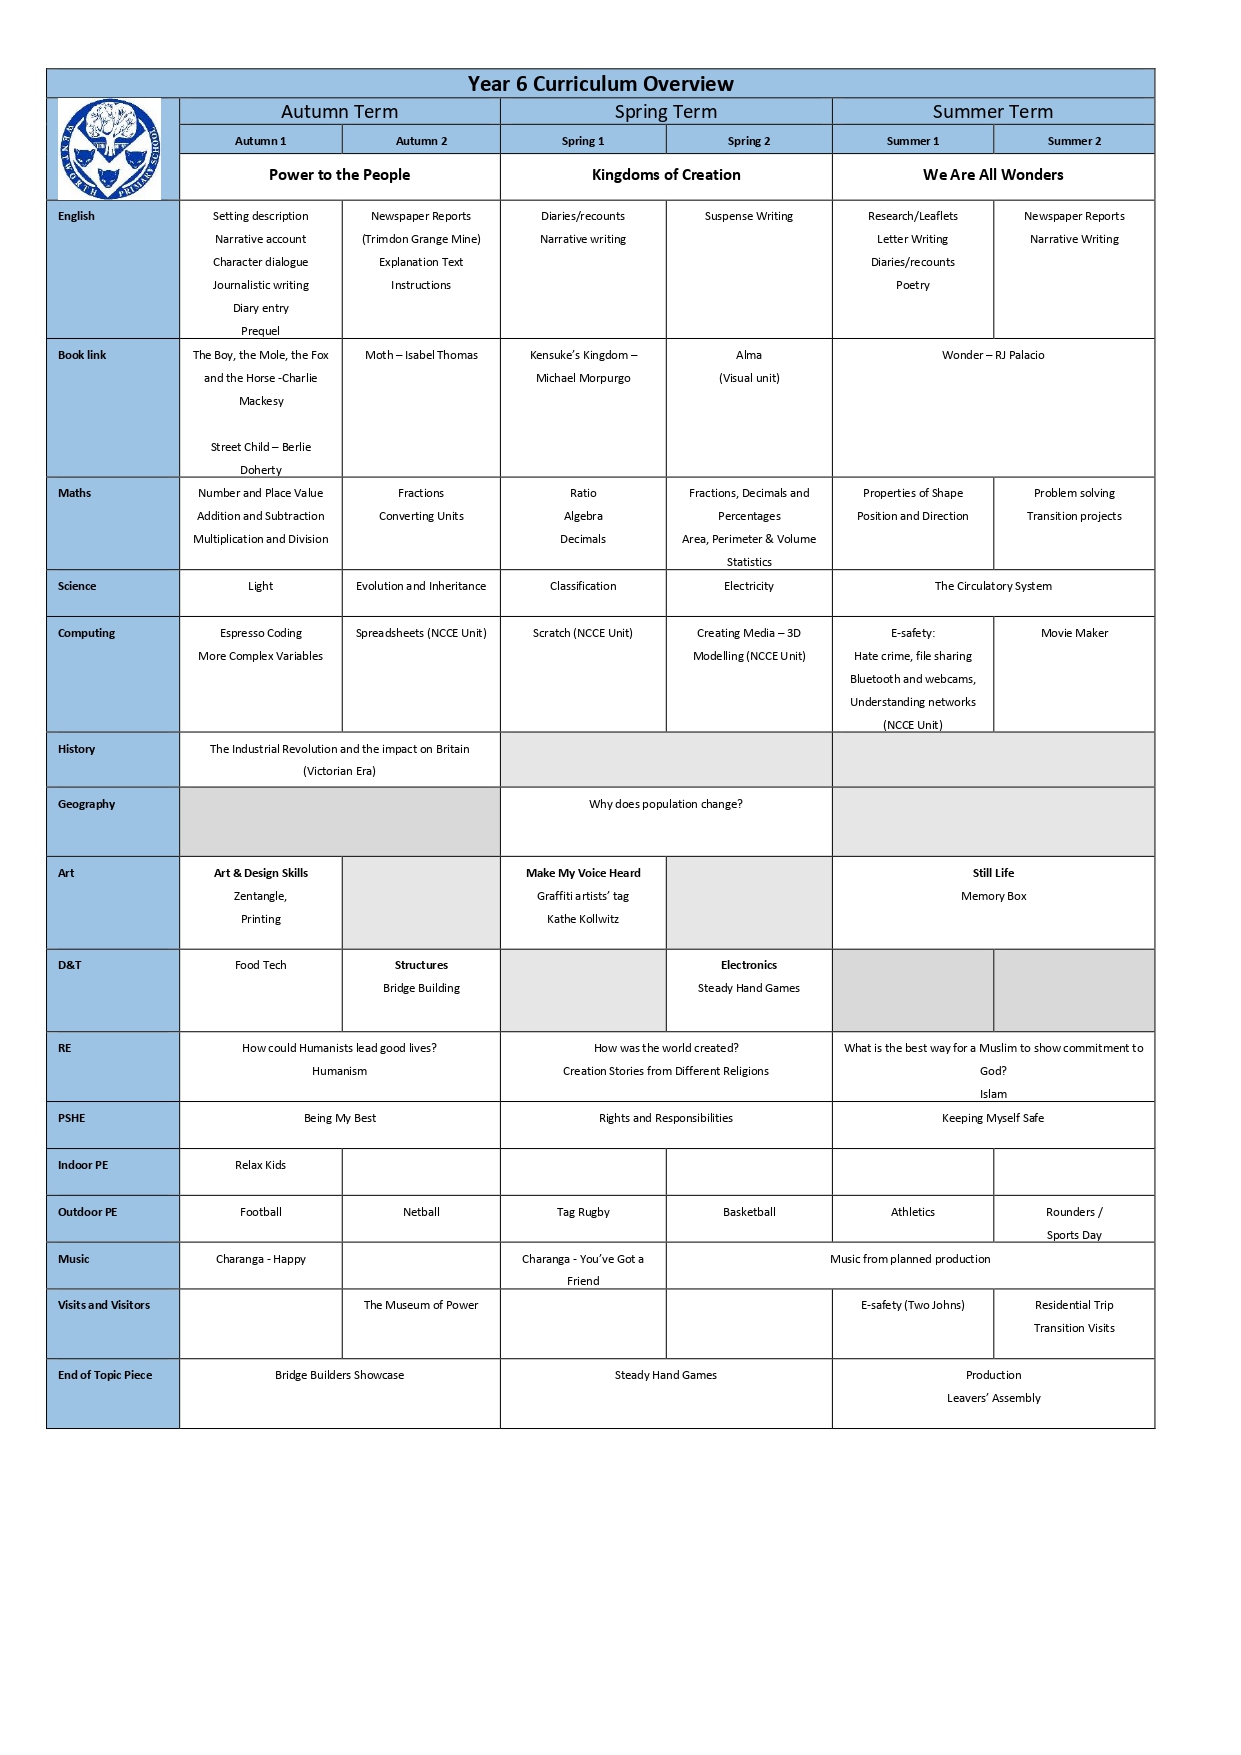 Curriculum Map Year 6_page-0001.jpg